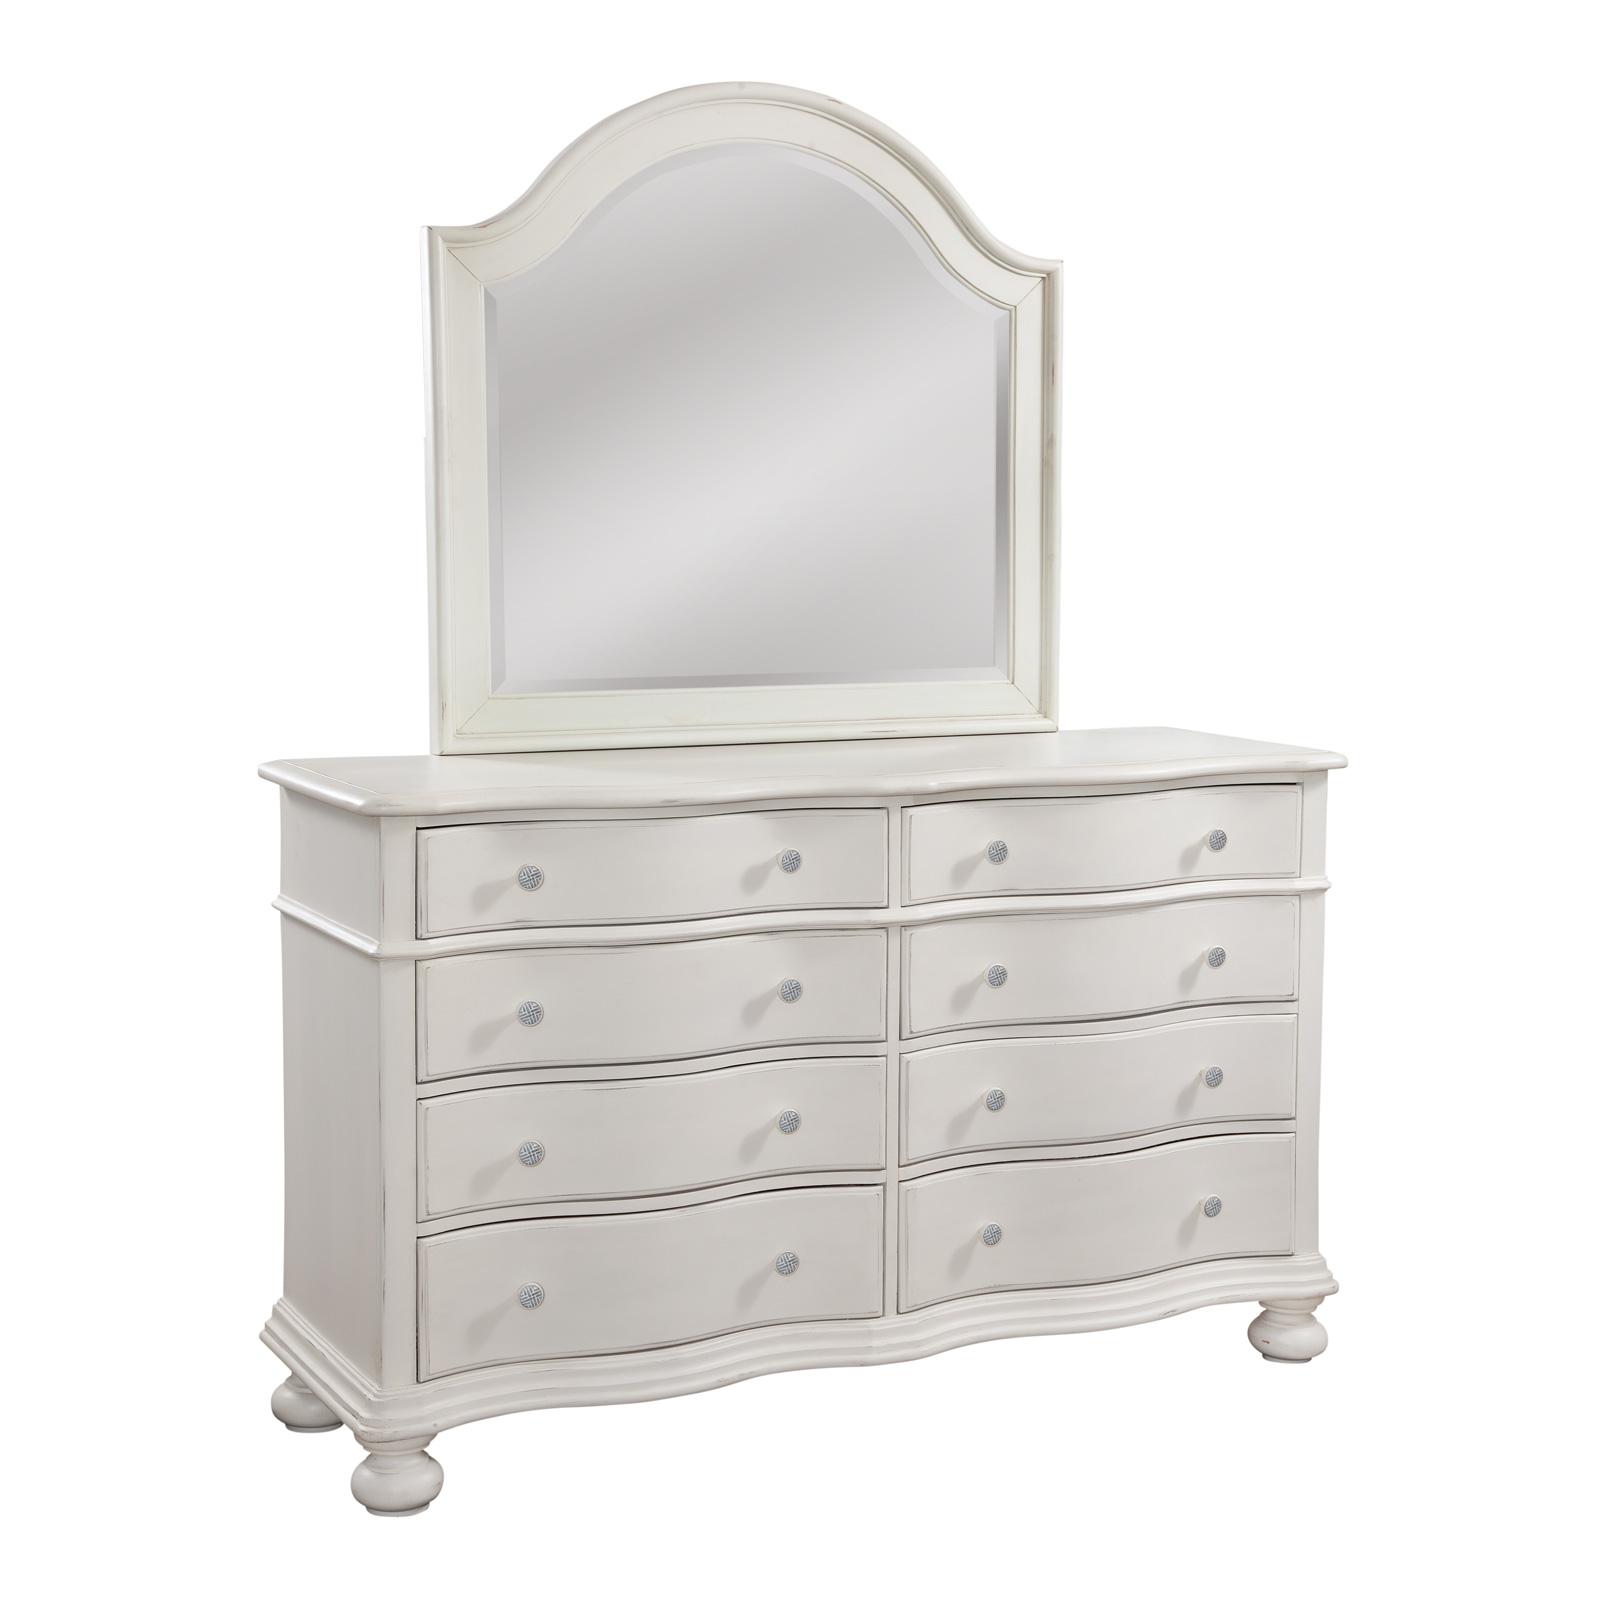 Youth, Traditional, Cottage Dresser With Mirror Rodanthe 3910-TDLM 3910-TDLM in White Finish 